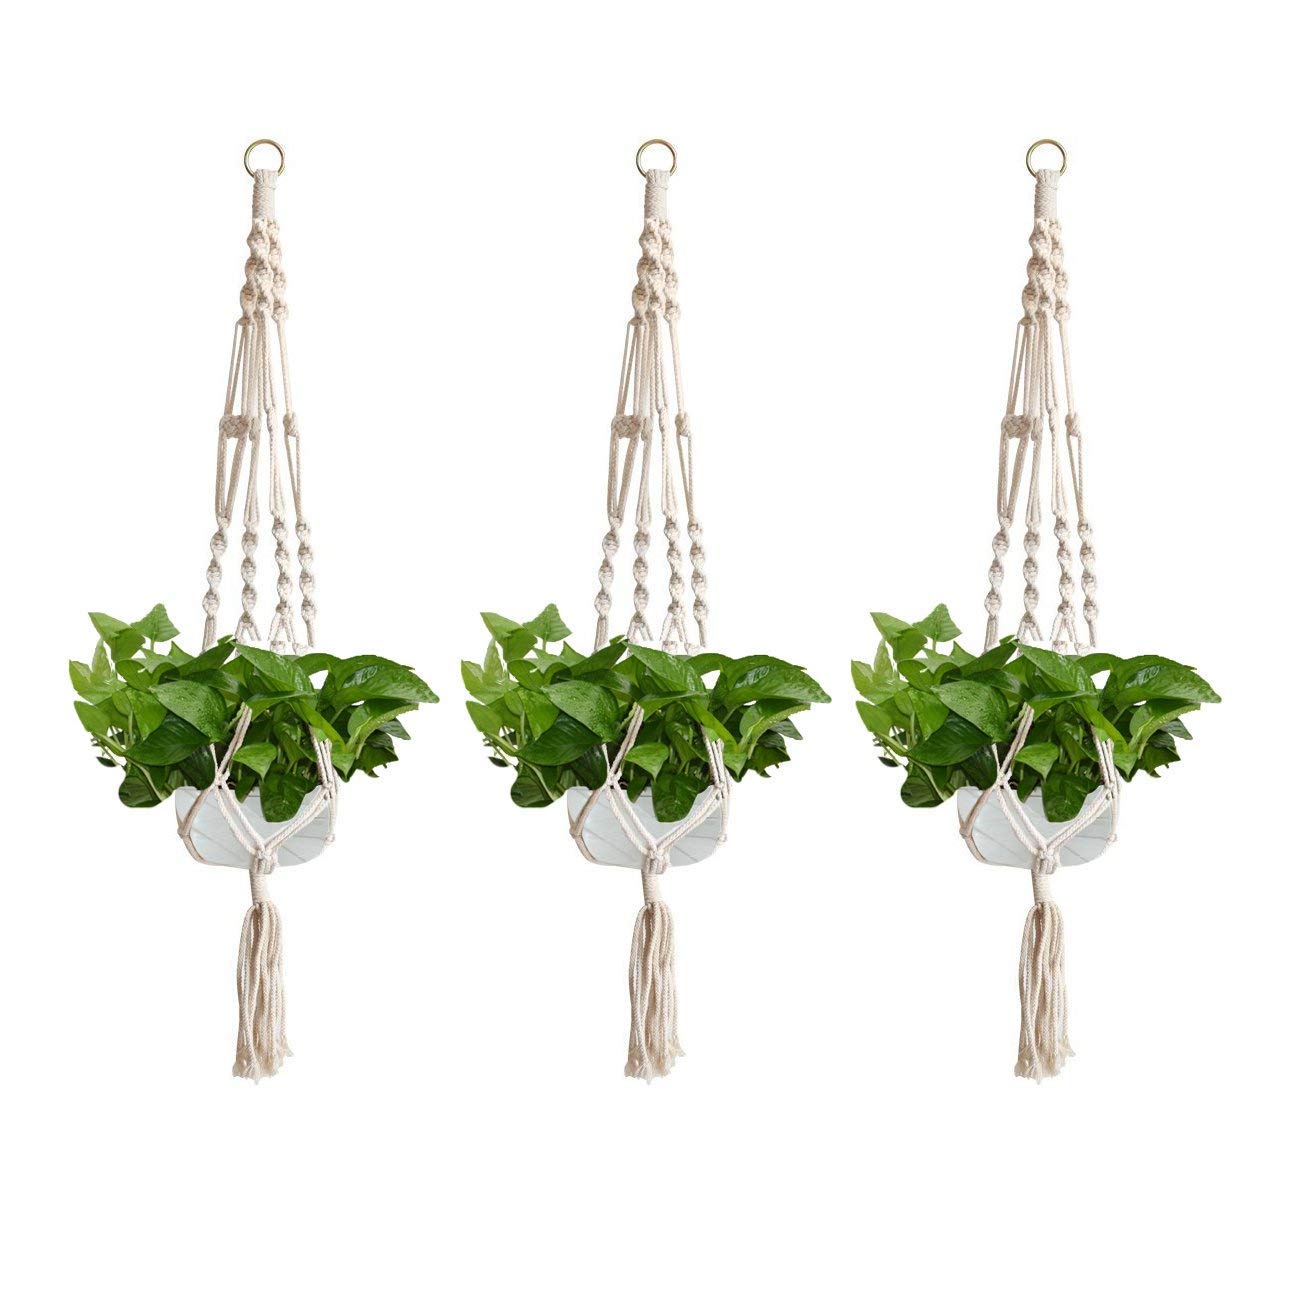 Jcoze Cotton Rope Plant Hangers Hanging Planter For Outdoor Indoor Wall Hanging Planter Holder Home Decoration 3 Pcs